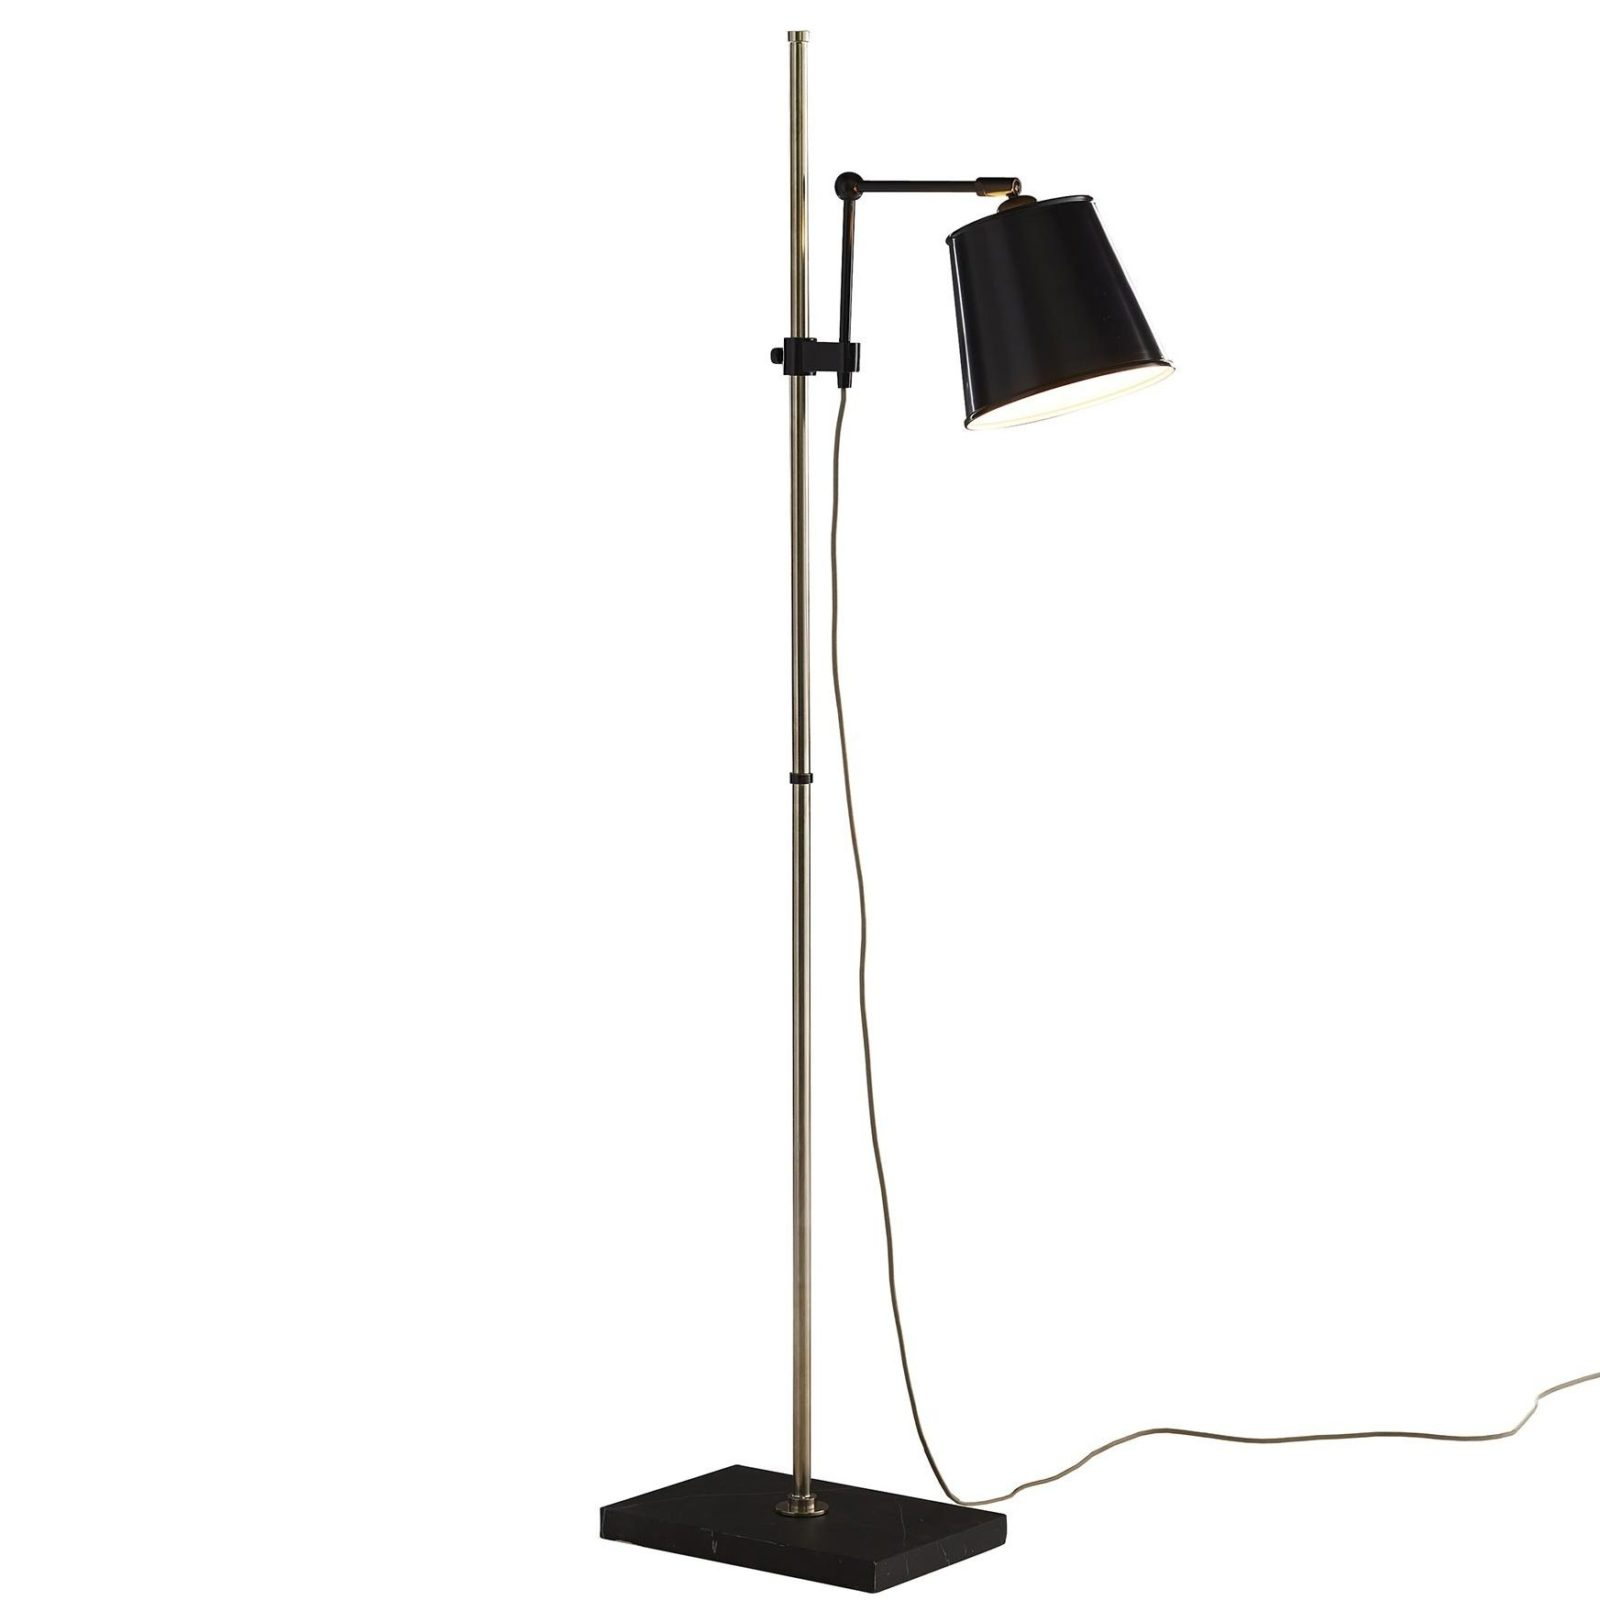 Adjustable Floor Lamp intended for sizing 1600 X 1600